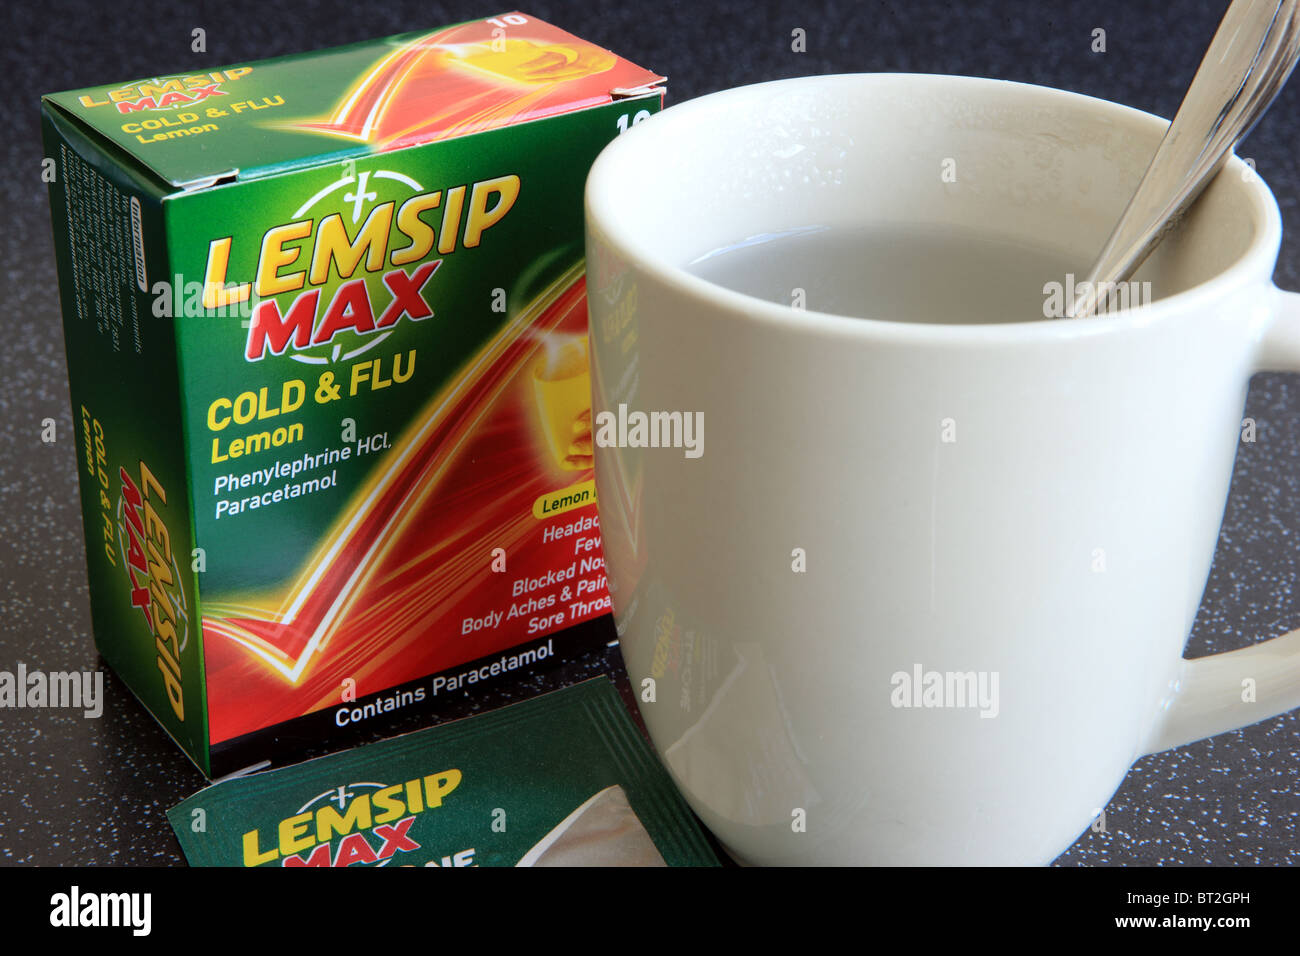 Lemsip cold and flu remedy Stock Photo